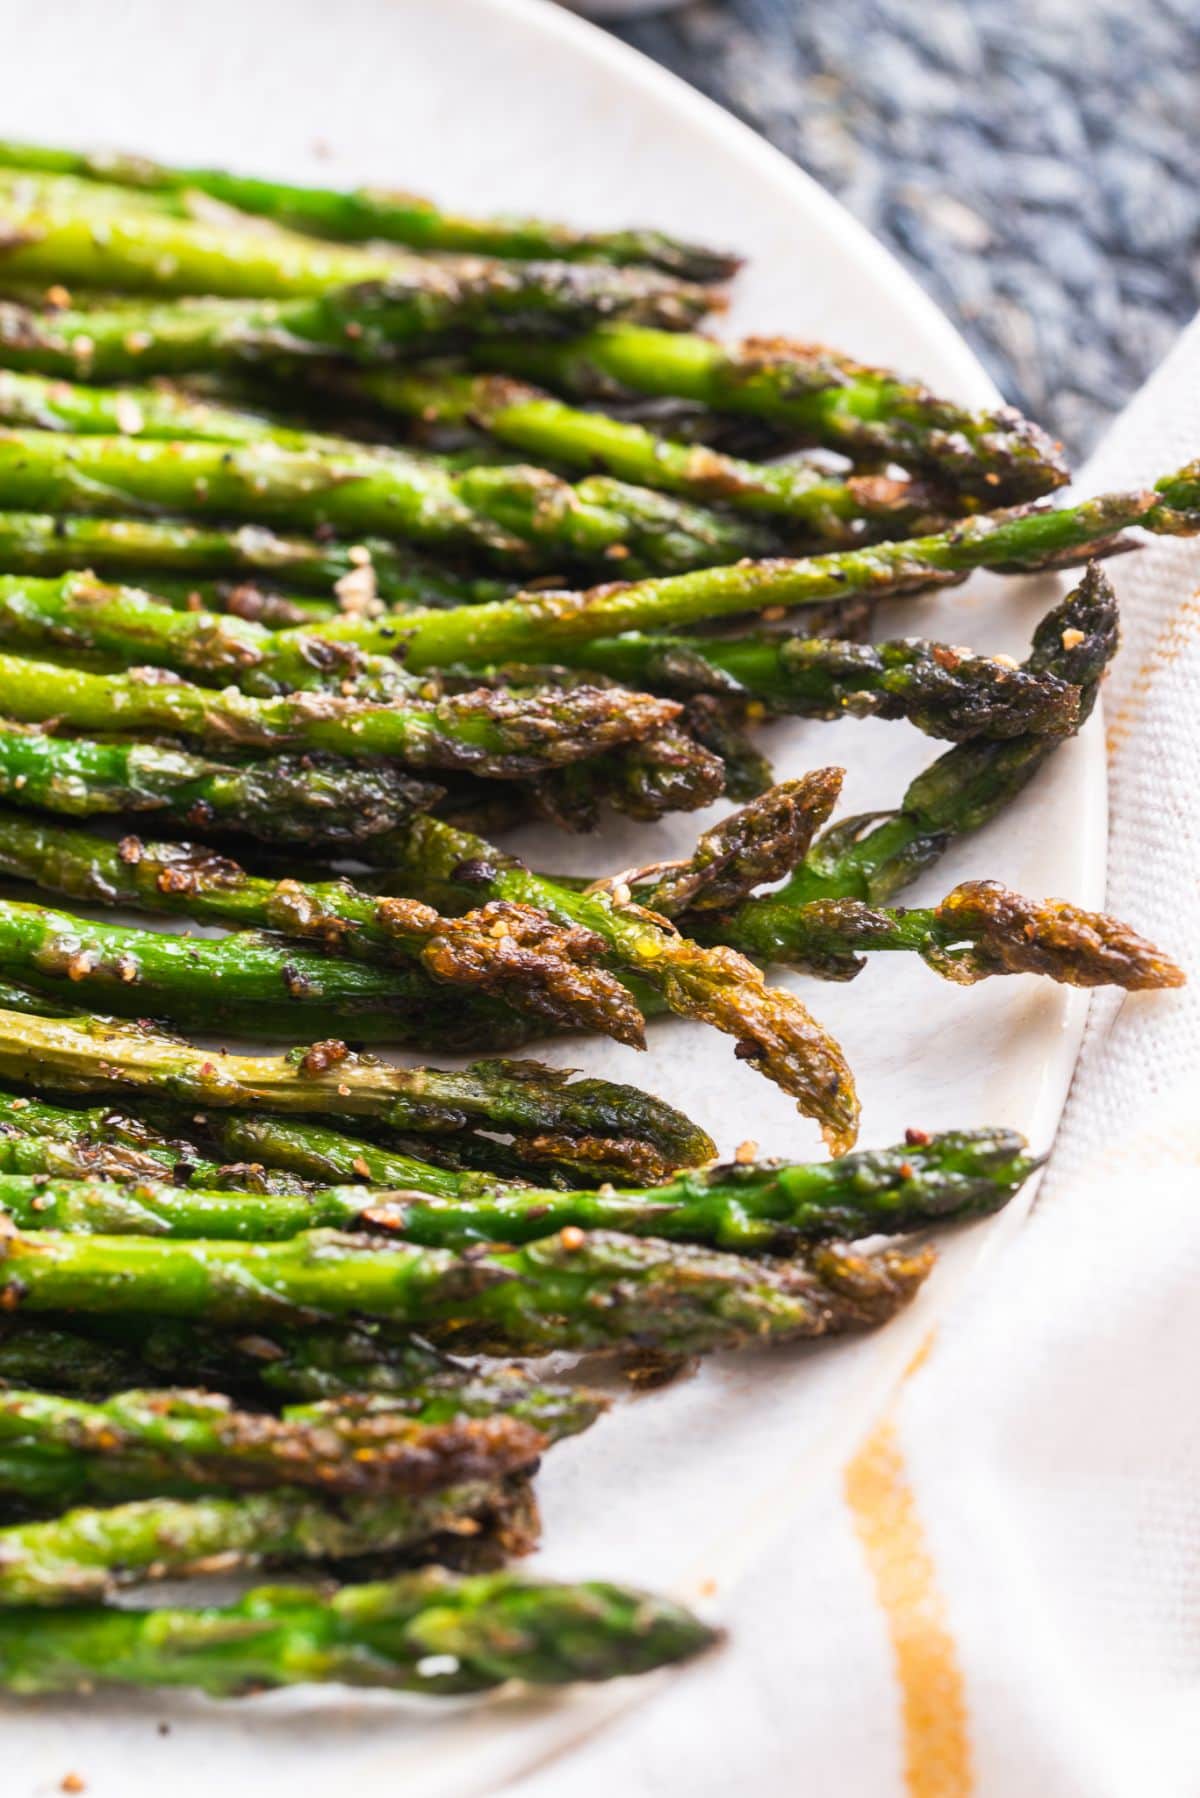 How to cook asparagus 2